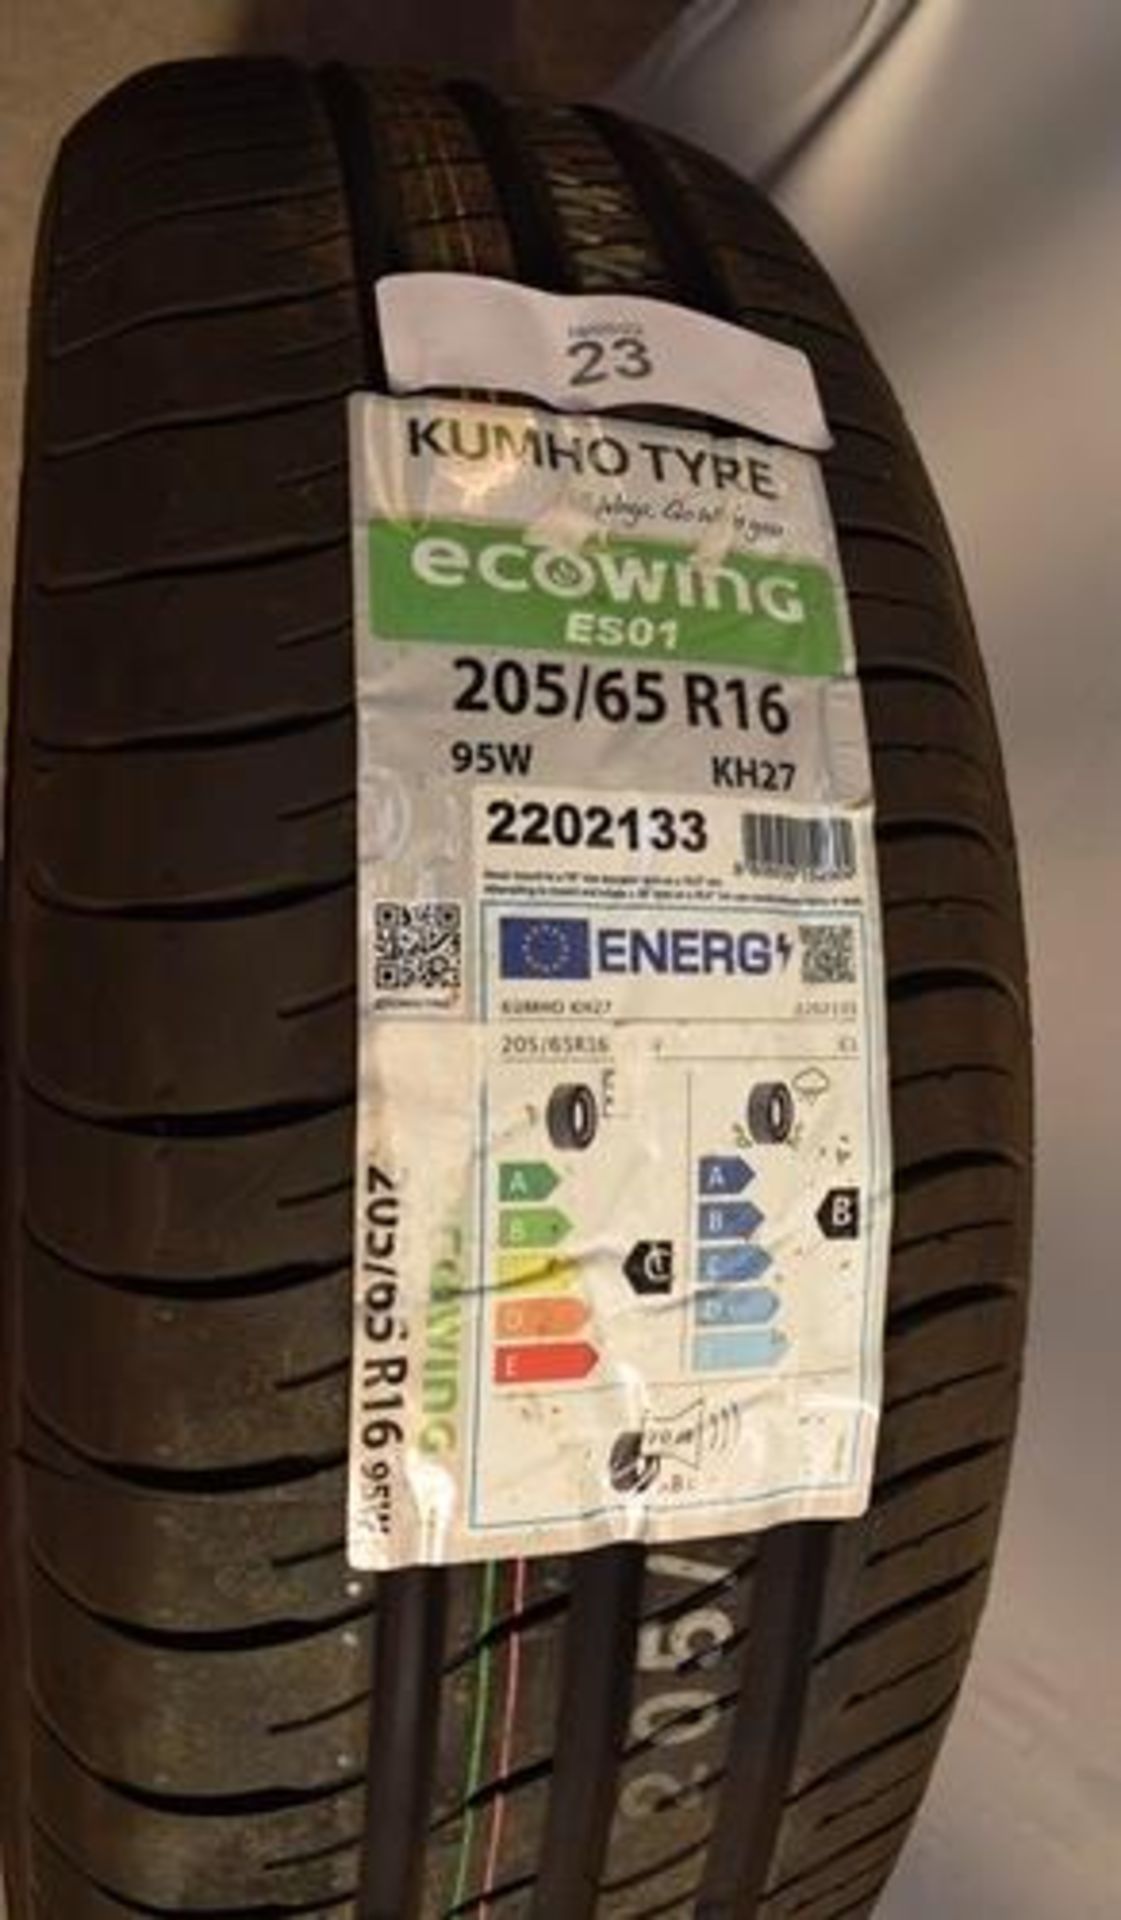 1 x Kumho Ecowing KH27 ES01 tyre, size 205/65R16 95W - New with label (GS2) - Image 2 of 2